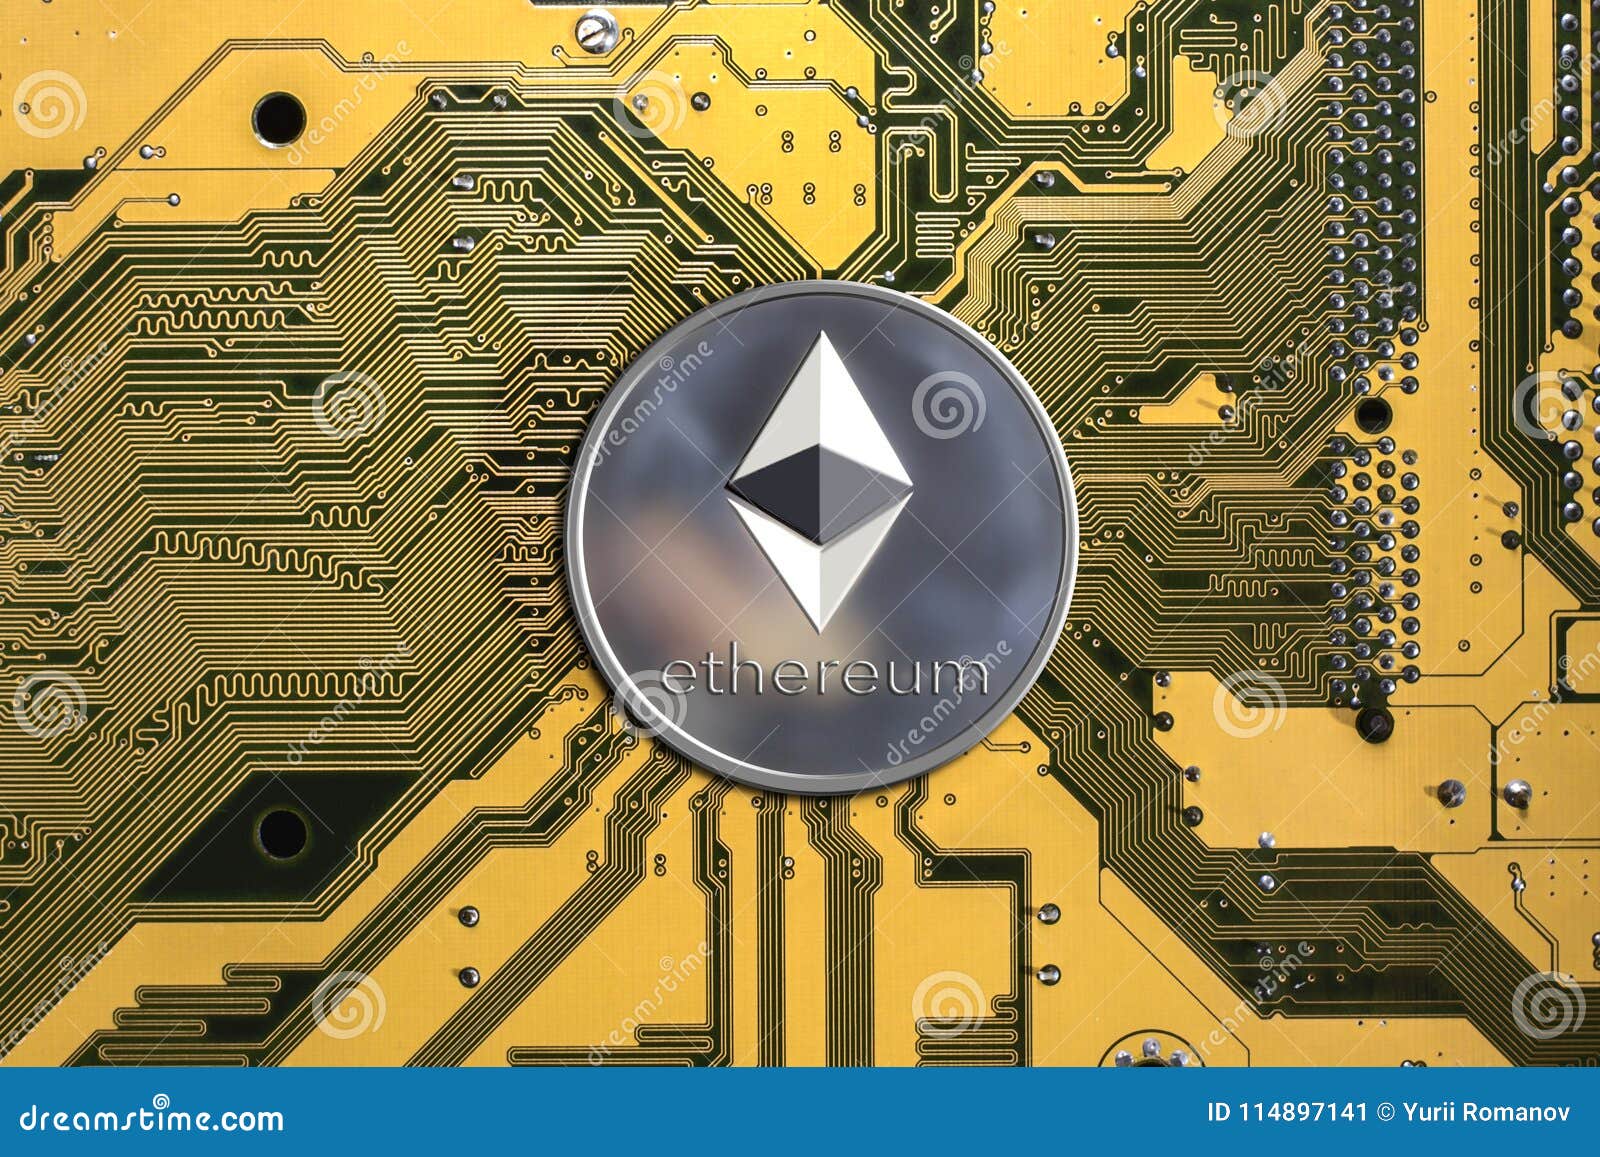 Etherium Coin : Ethereum Coin Isolated On The White ...